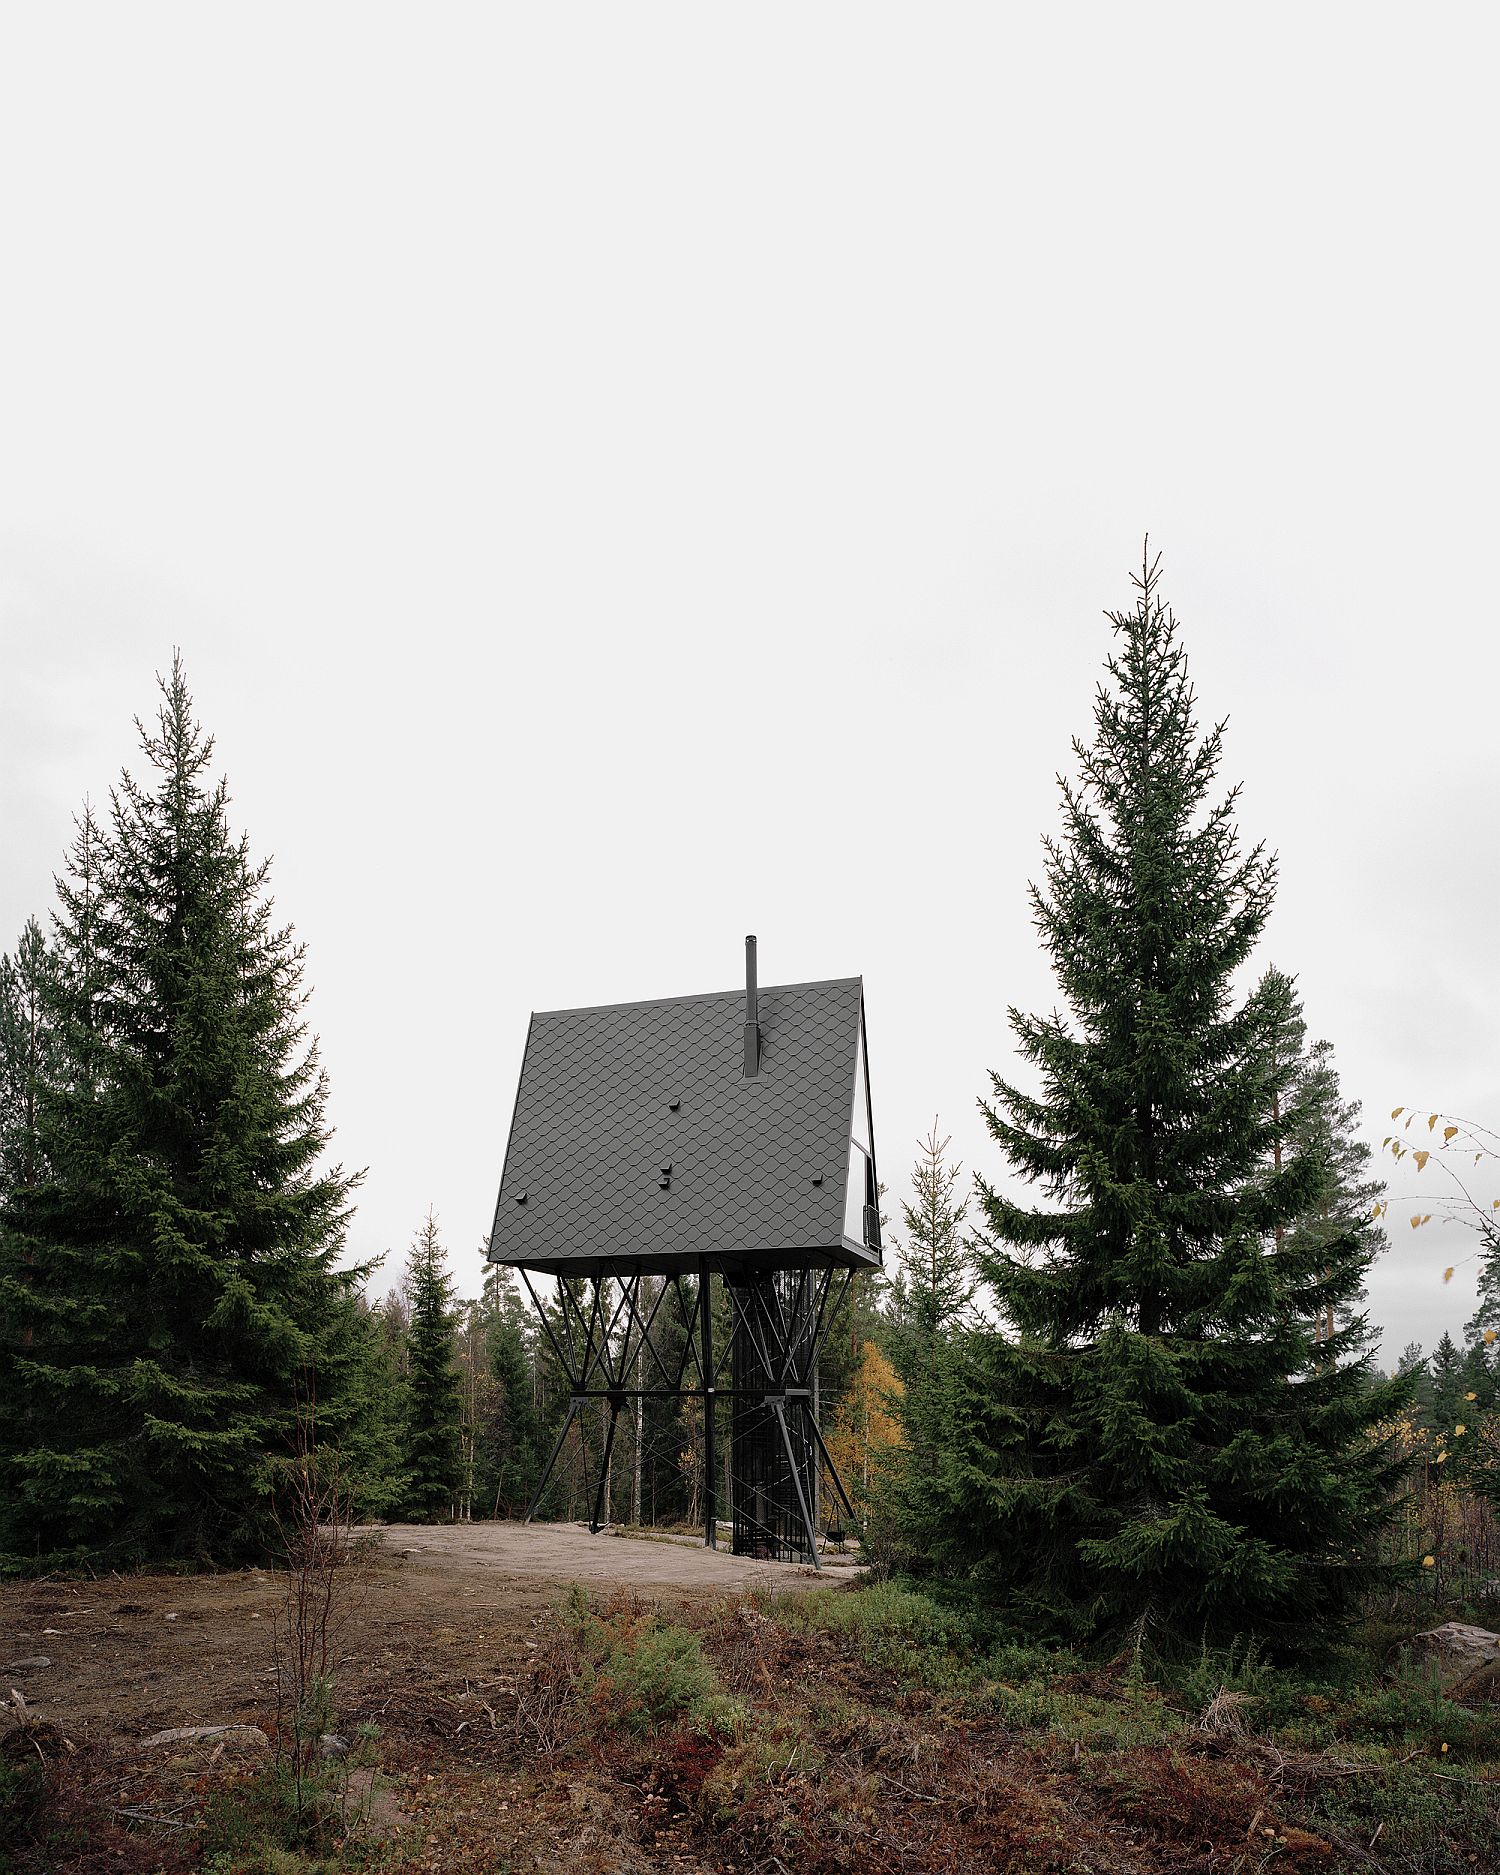 Steel plays a major role in shaping the sturdy exterior of the forest cabin